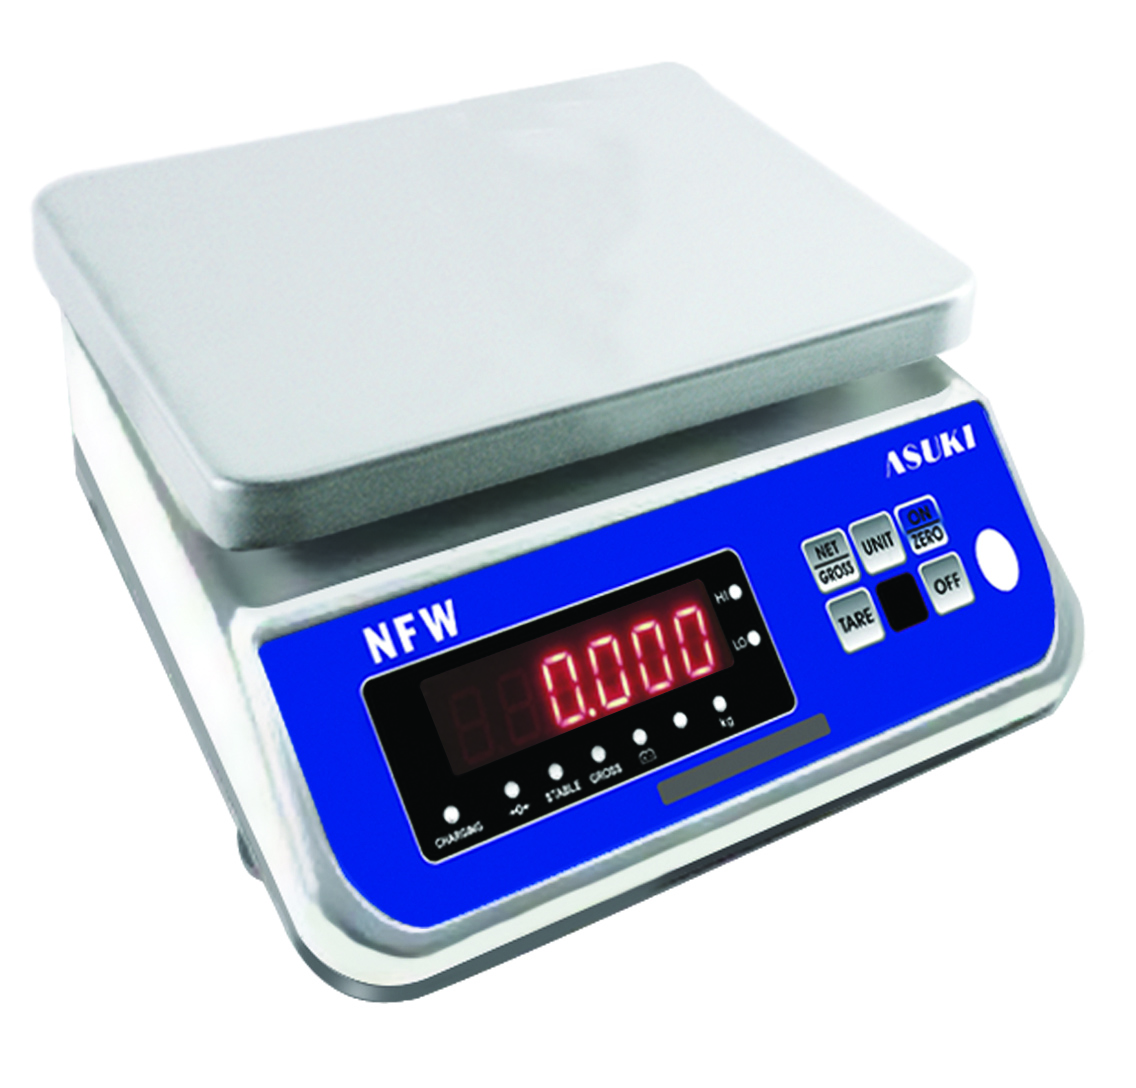 Scales List, Weighing, Products